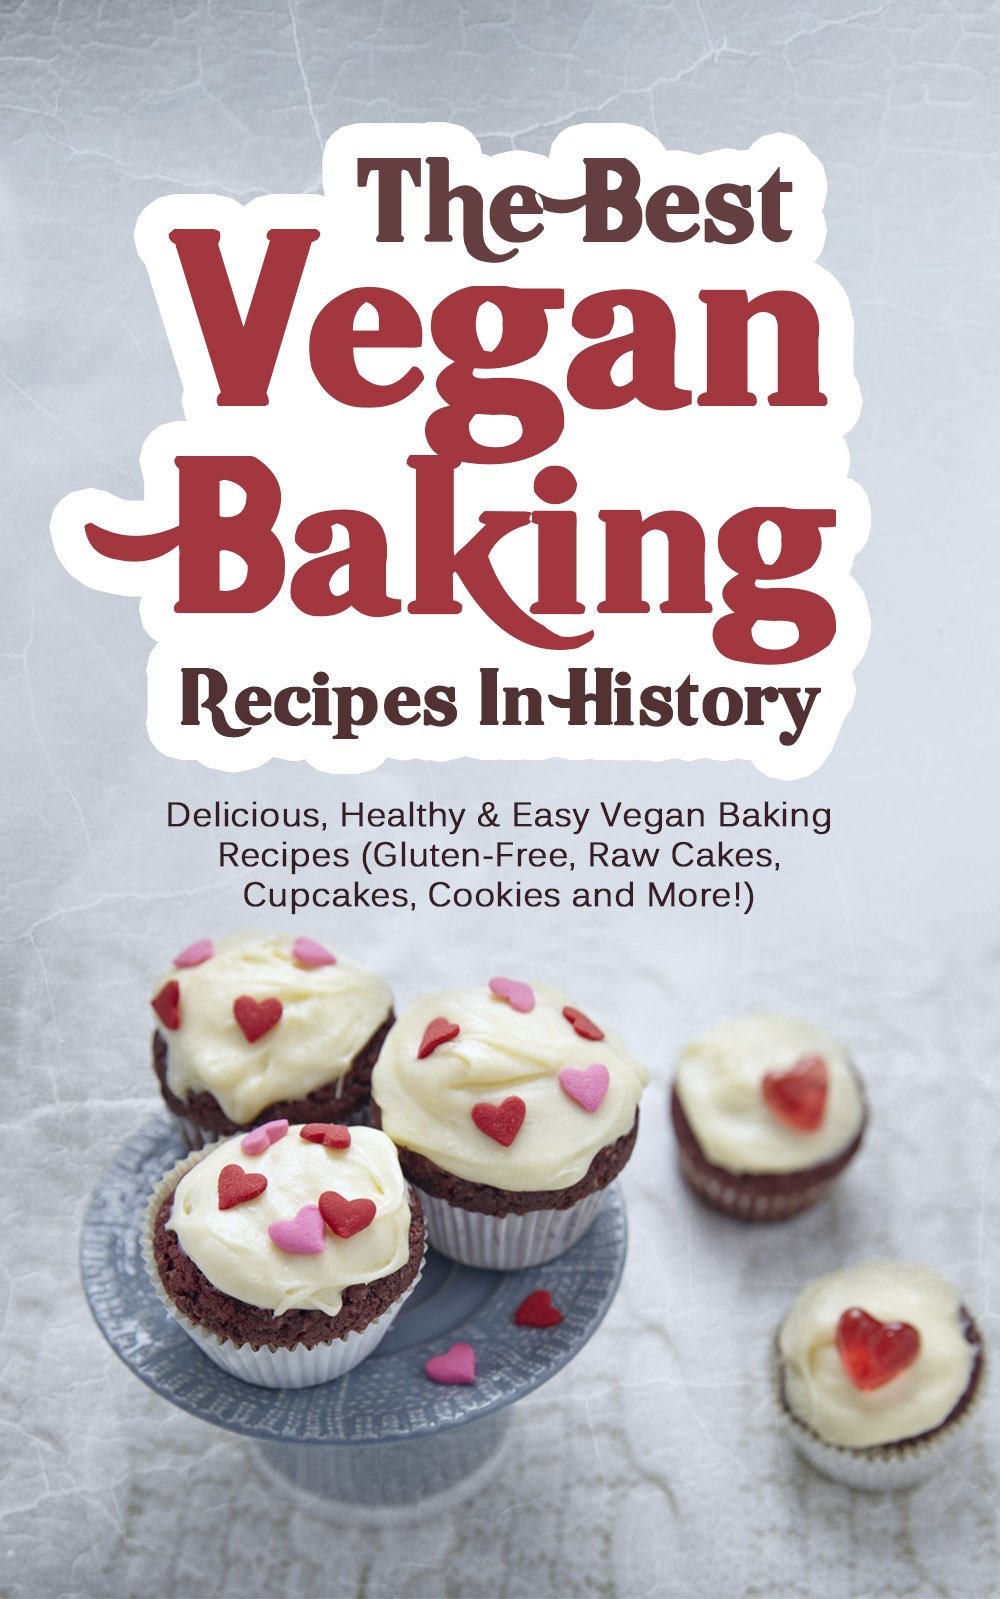 The Best Vegan Baking Recipes In History